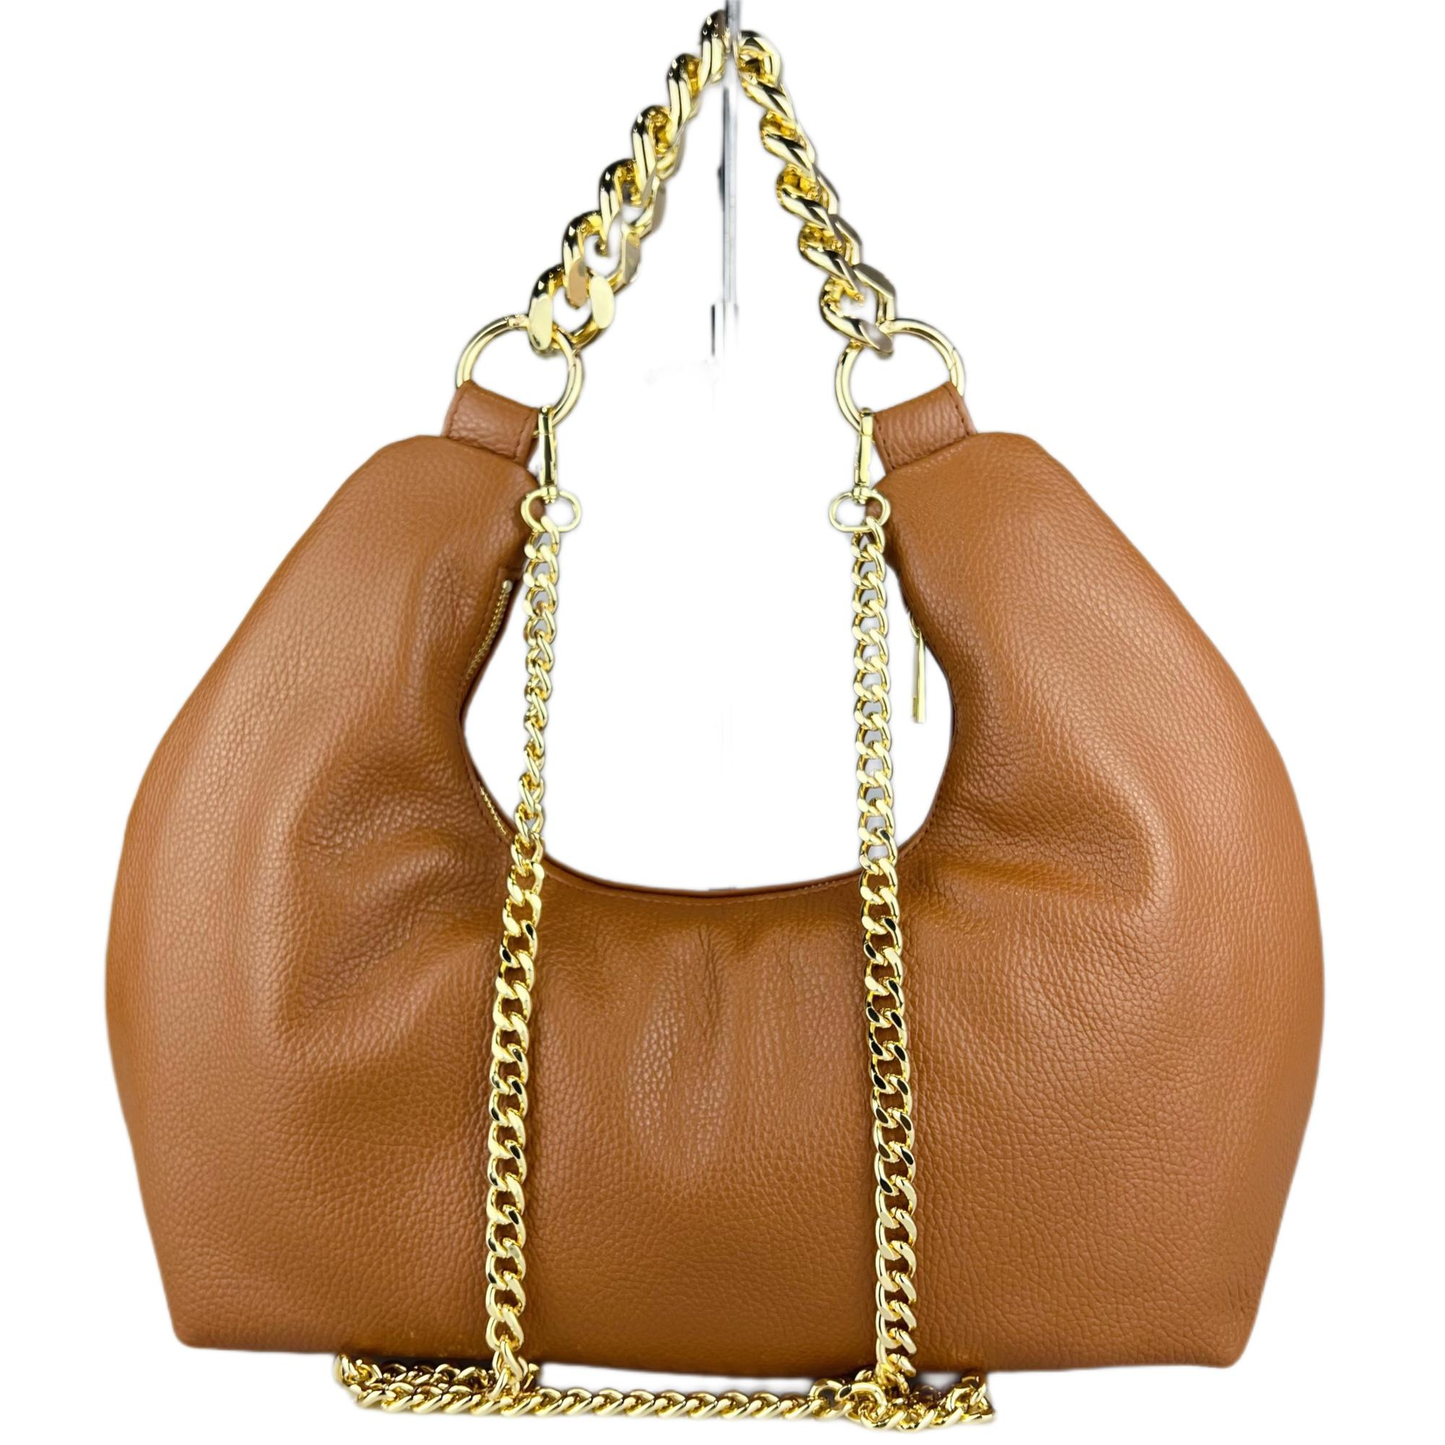 Parioli Large Soft  Shoulder bags With Chain Handle- Genuine Leather